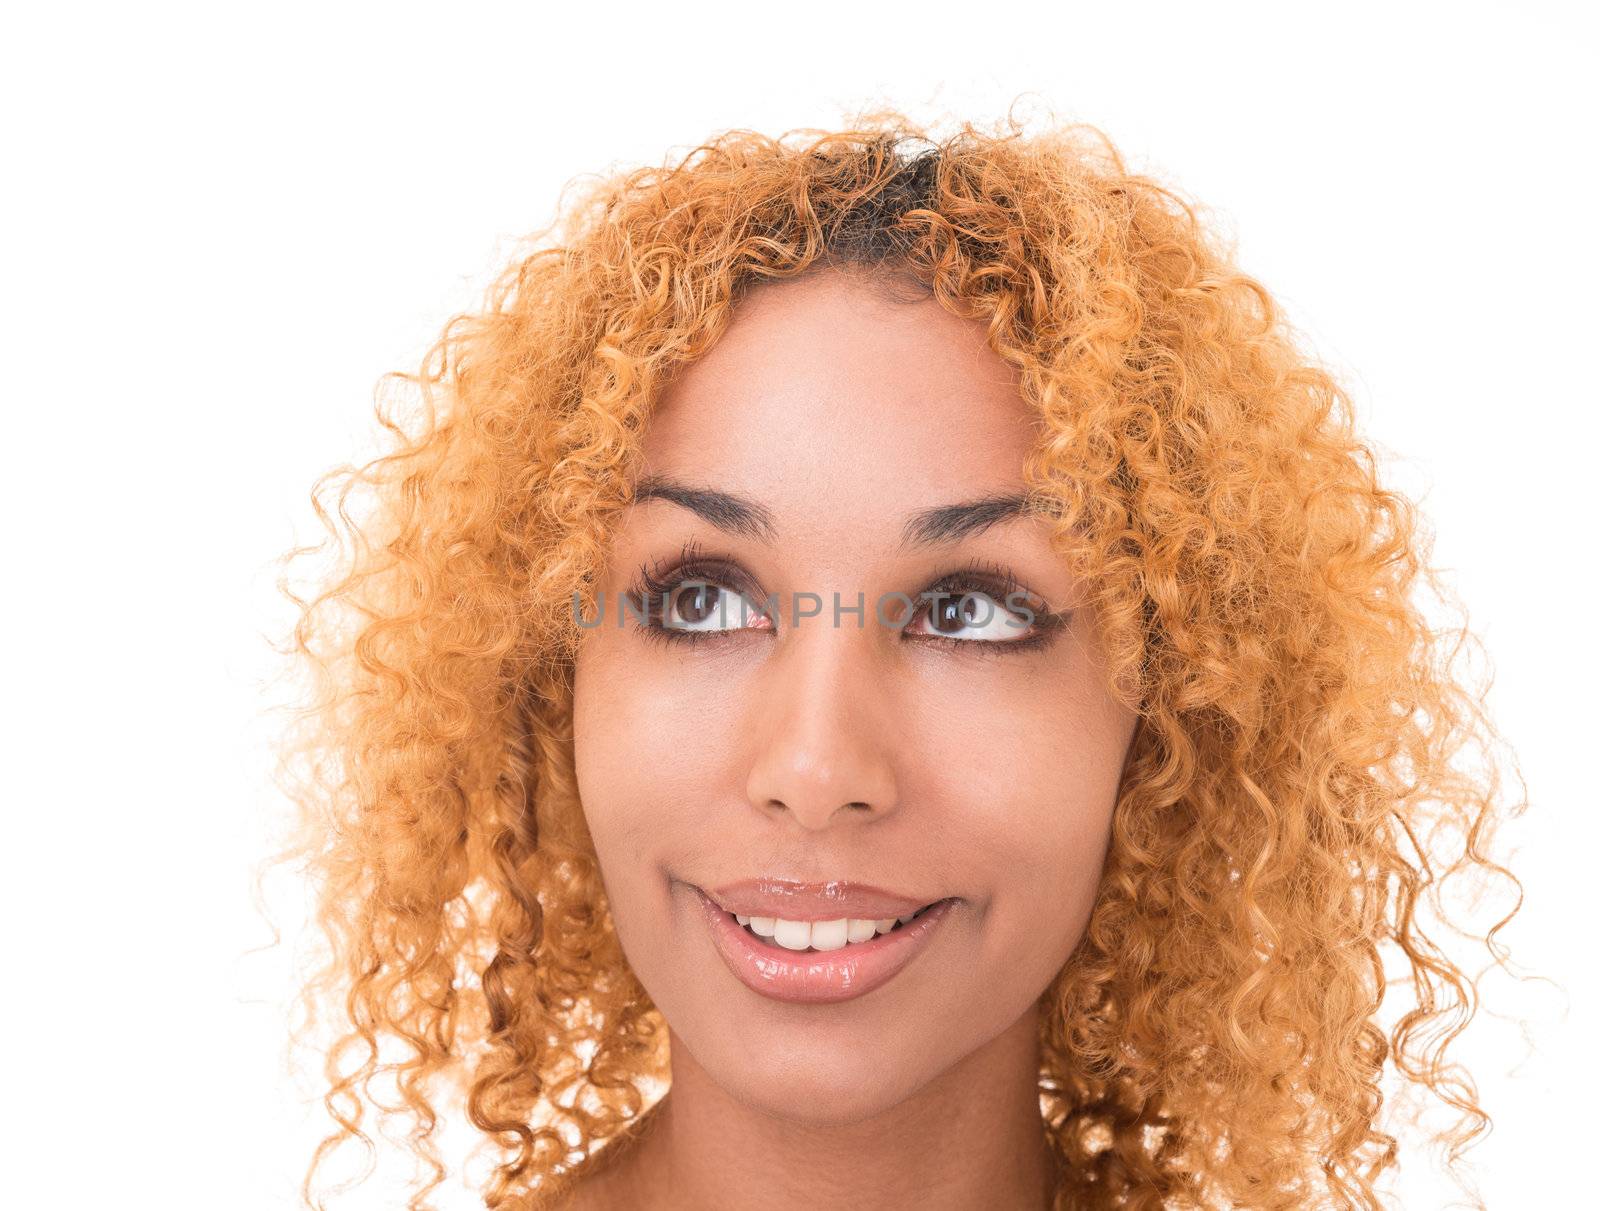 Portrait of attractive girl with curly golden hair